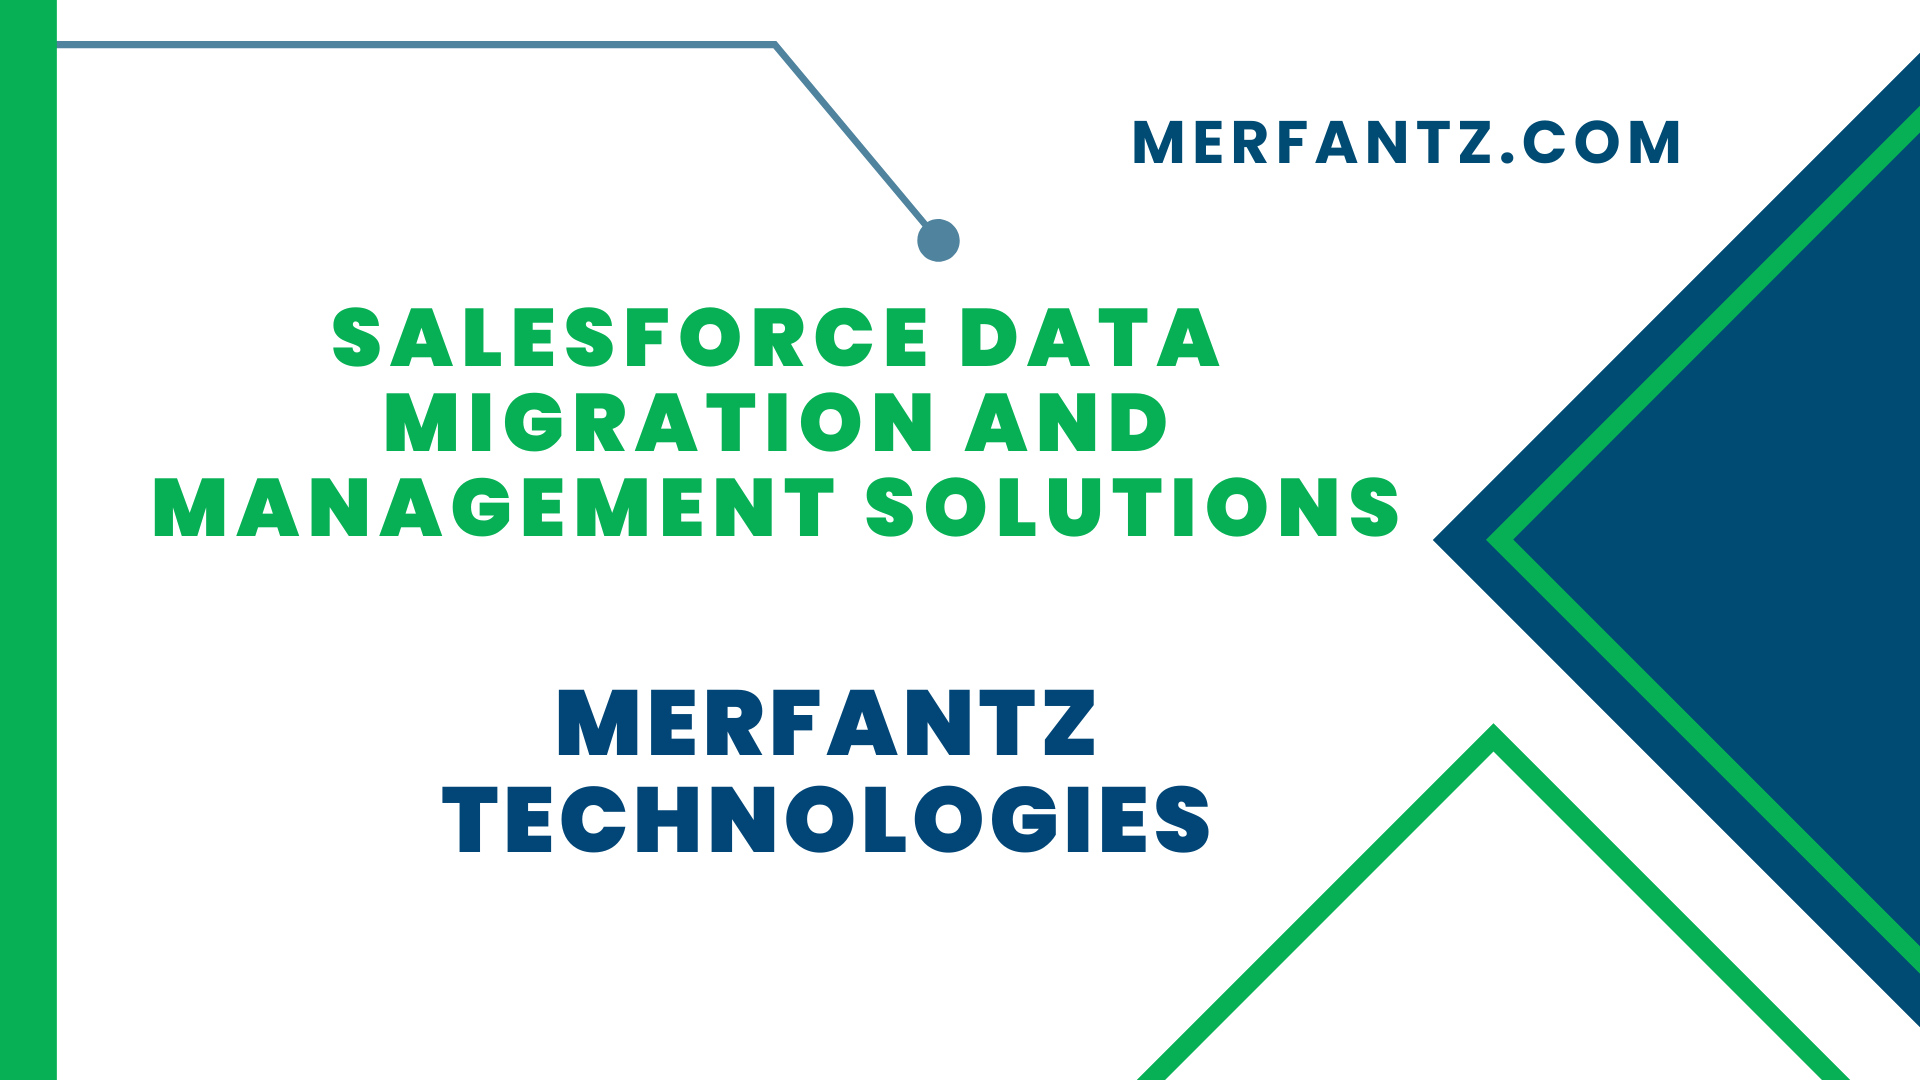 Salesforce Data Migration and Management Solutions